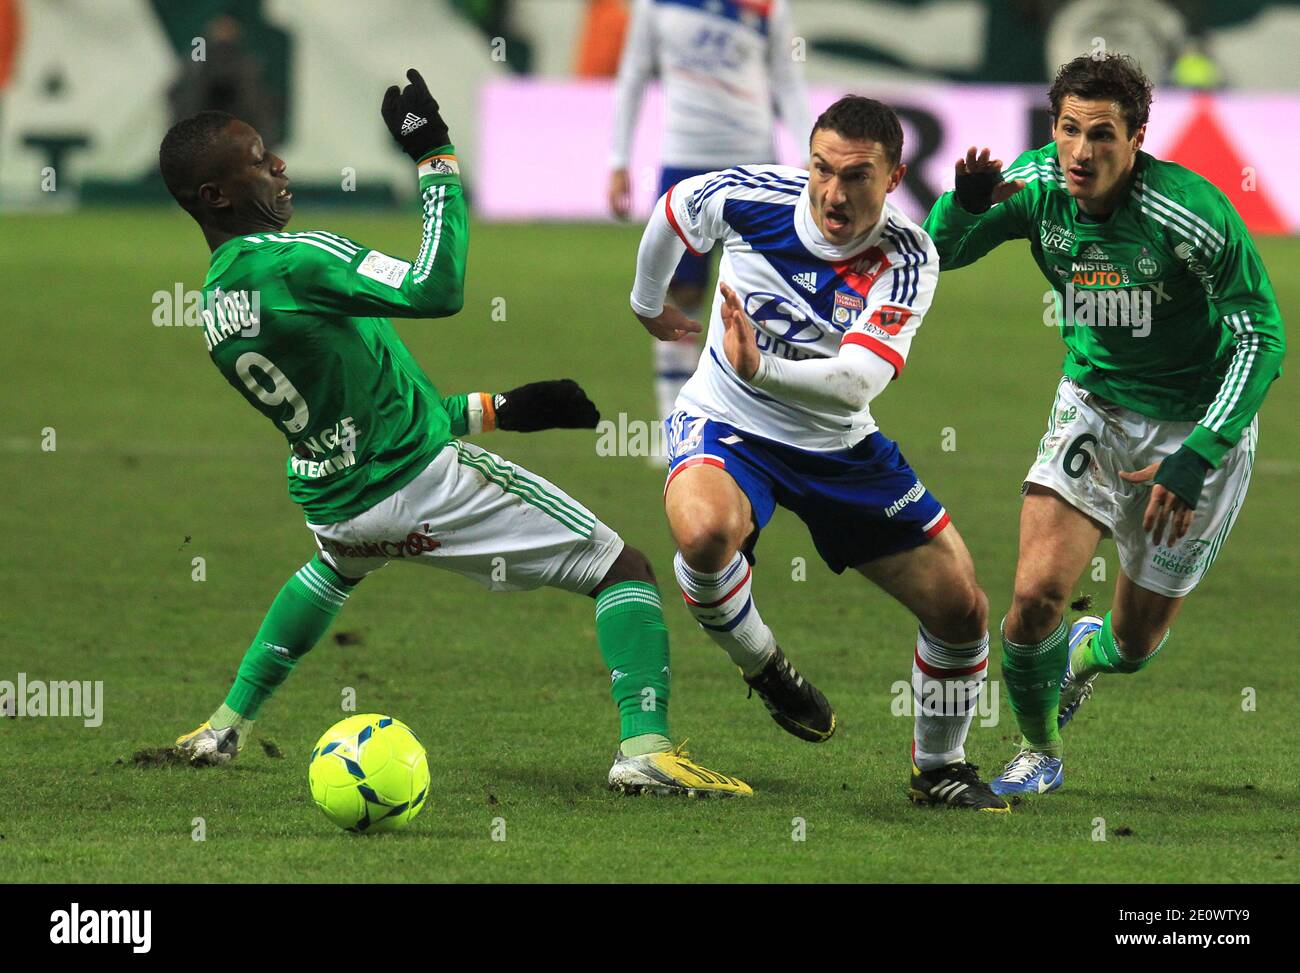 OL's Steed Malbranque and ASSE's Max Gradel , Jeremy Clement during the French First League soccer match, Olympique Lyonnais Vs AS Saint Etienne at Geoffroy-Guichard stadium in Saint-Etienne, France on December 9, 2012. Lyon won 1-0. Photo by Vincent Dargent/ABACAPRESS.COM Stock Photo